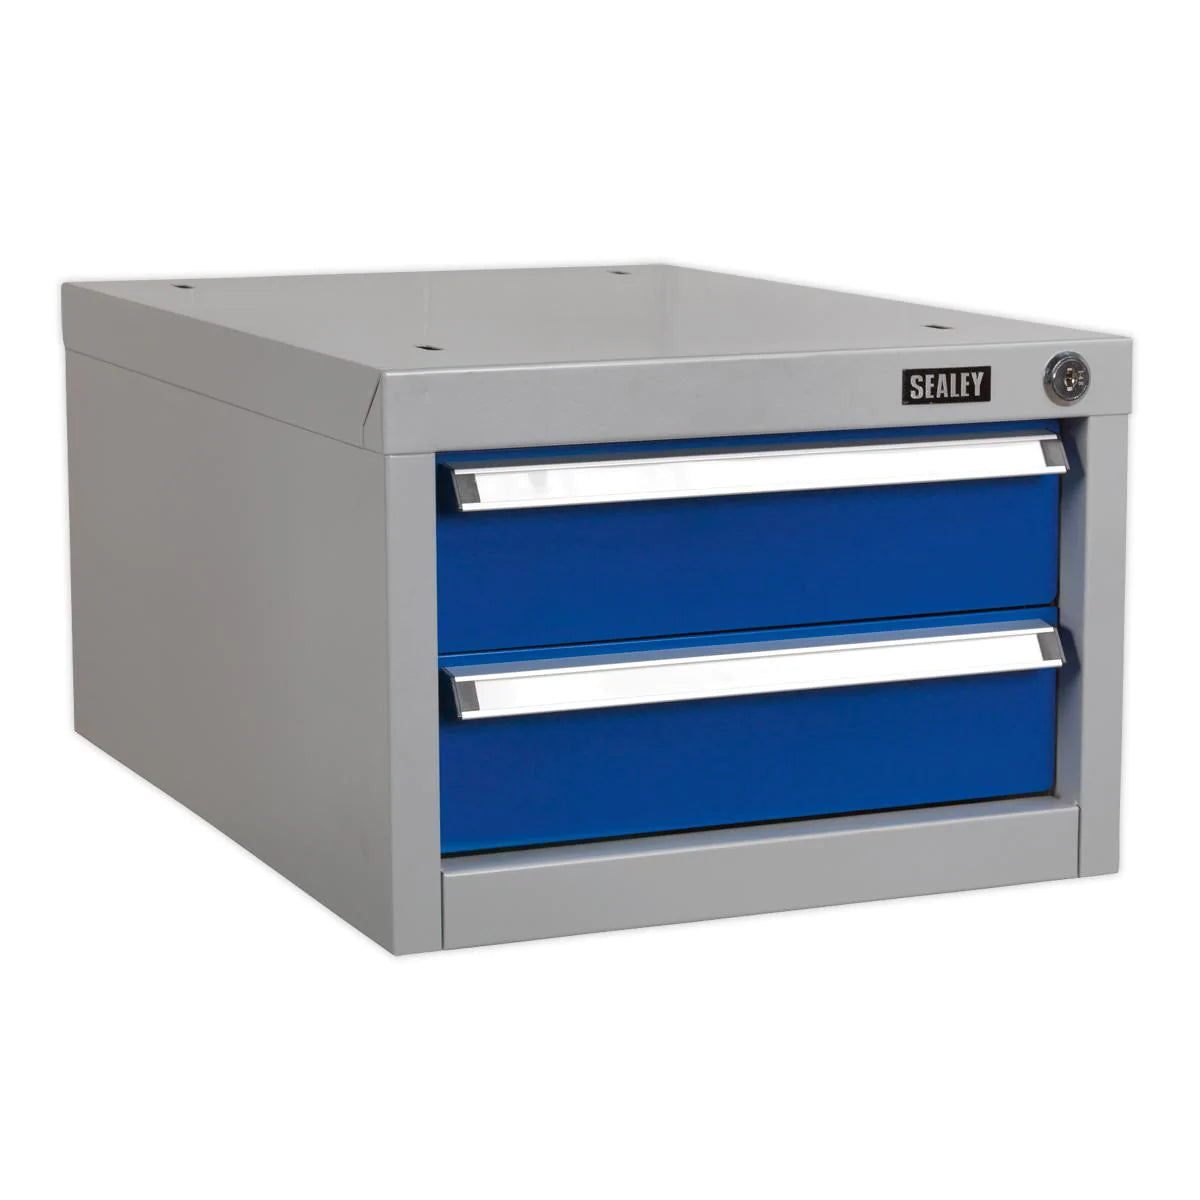 Double Drawer Unit for API Series Workbenches